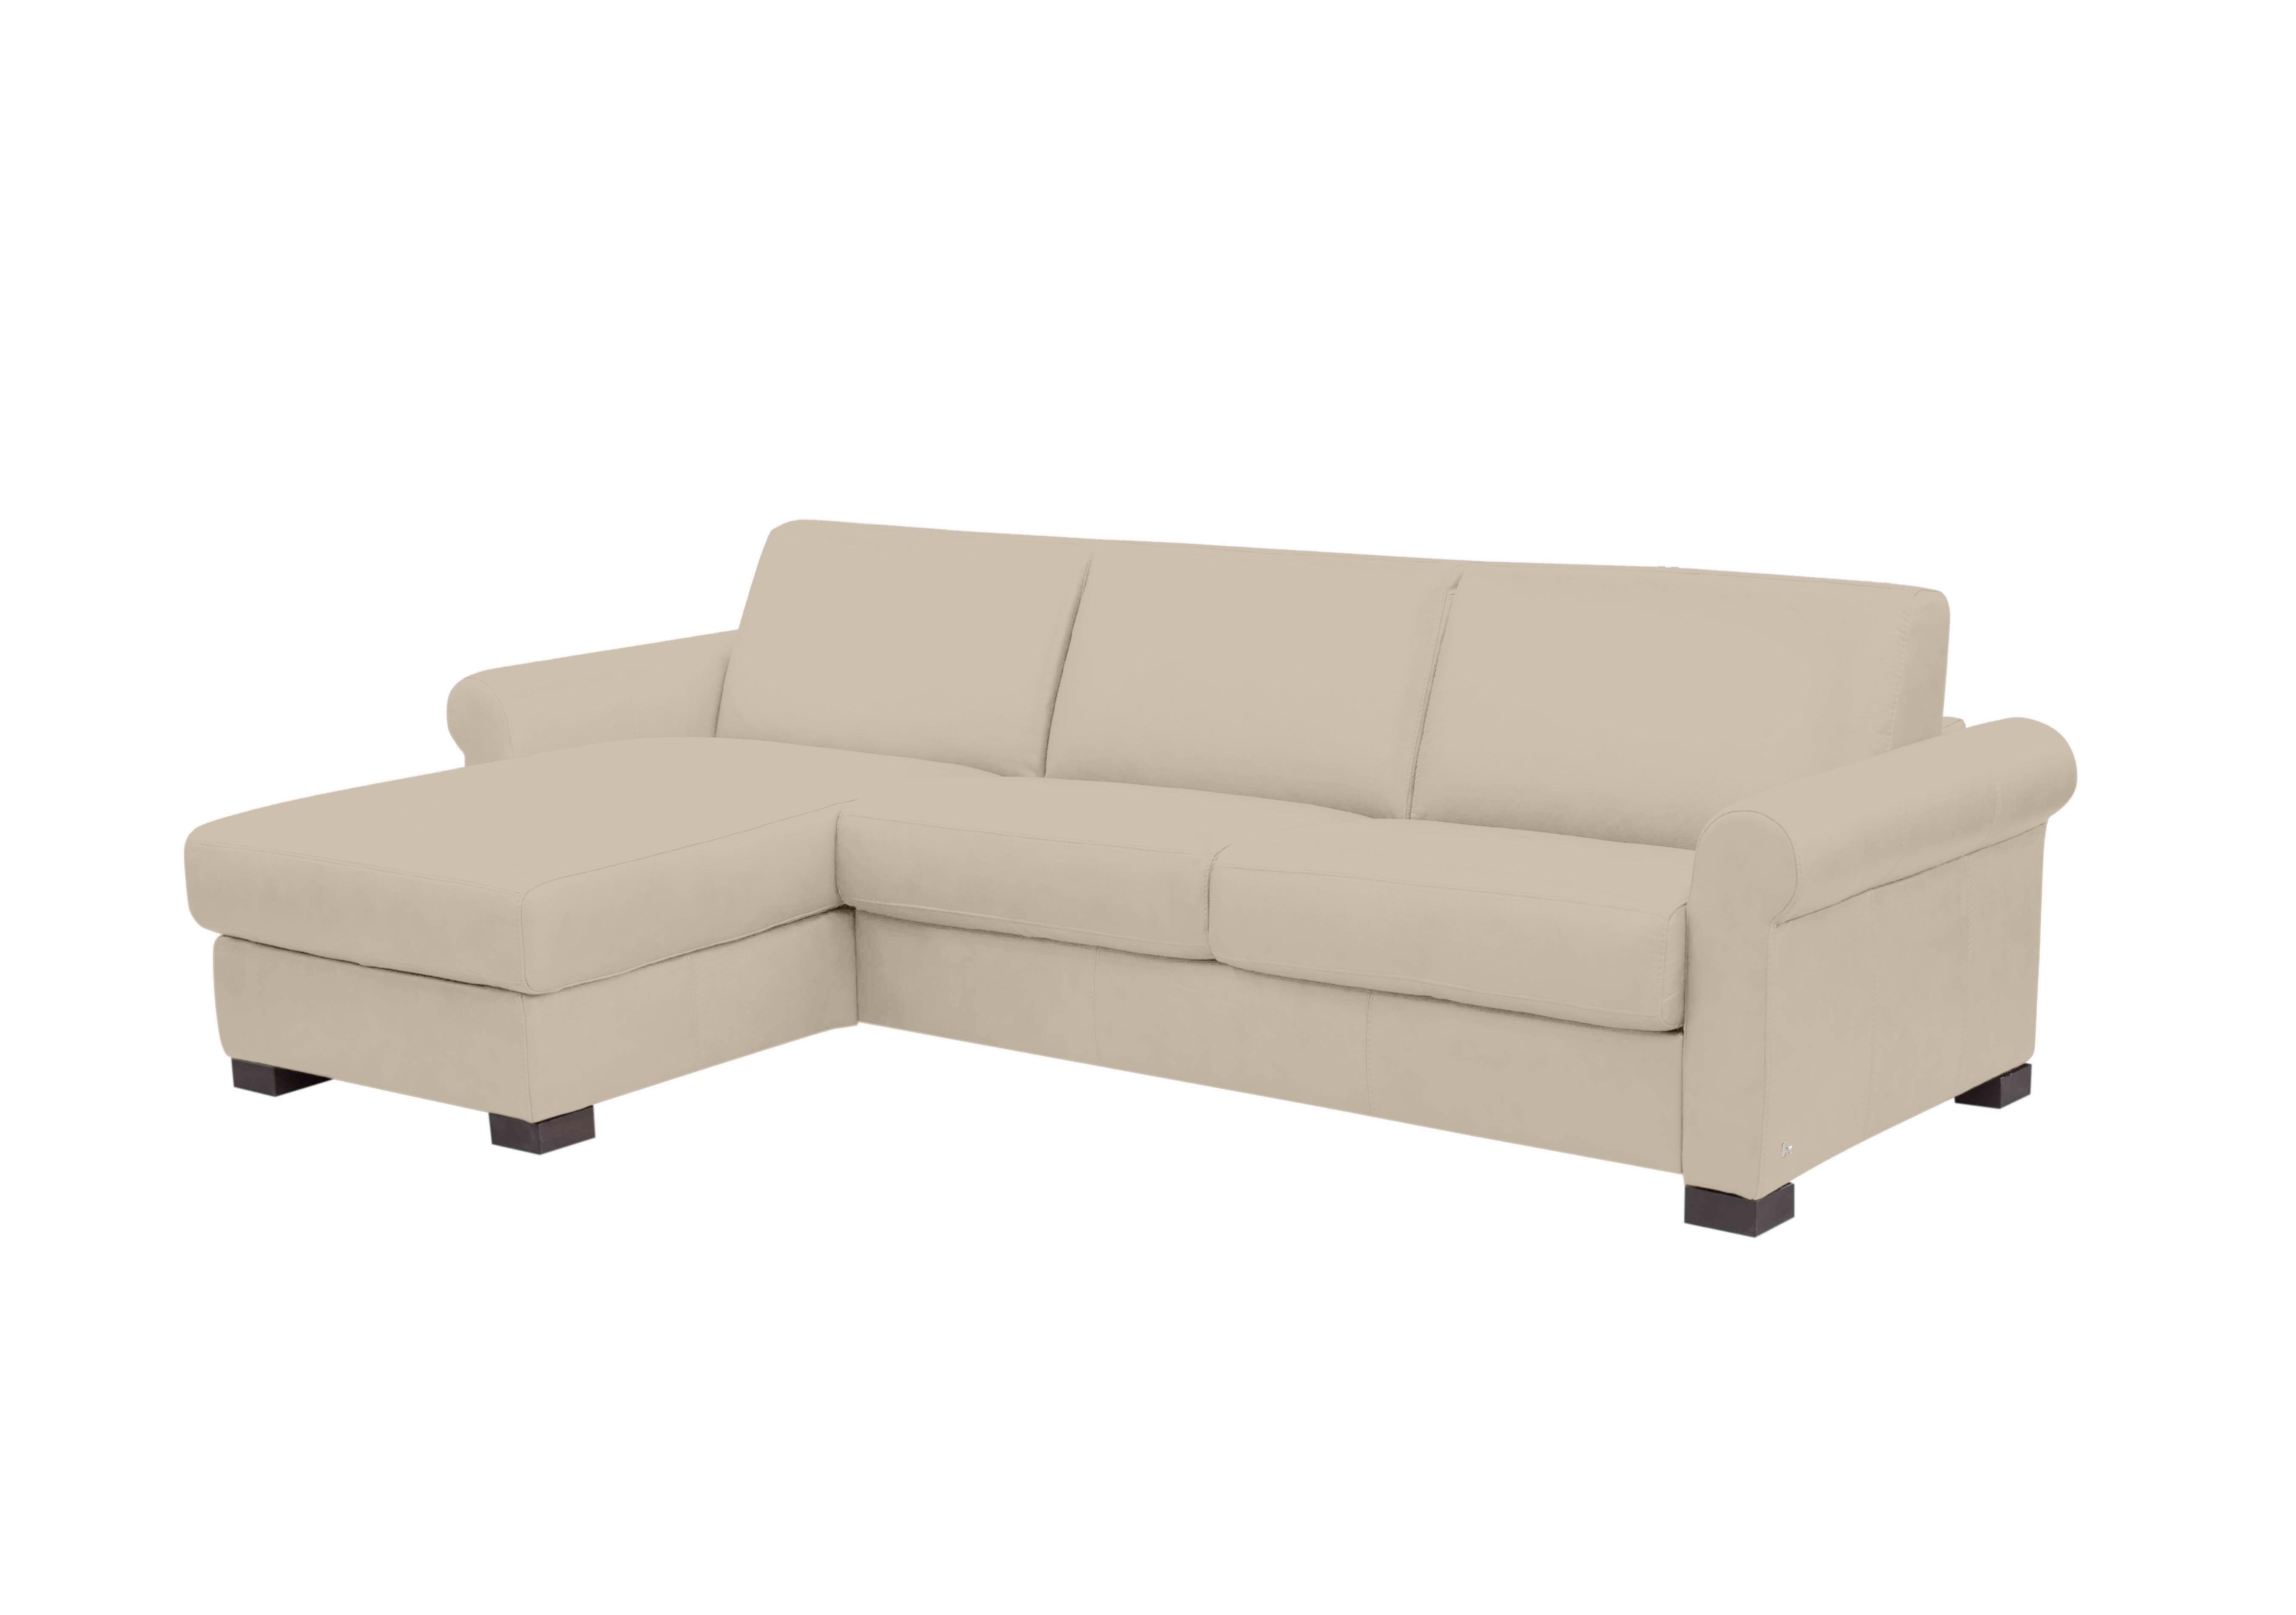 Alcova 3 Seater Leather Sofa Bed with Storage Chaise with Scroll Arms in Botero Crema 2156 on Furniture Village